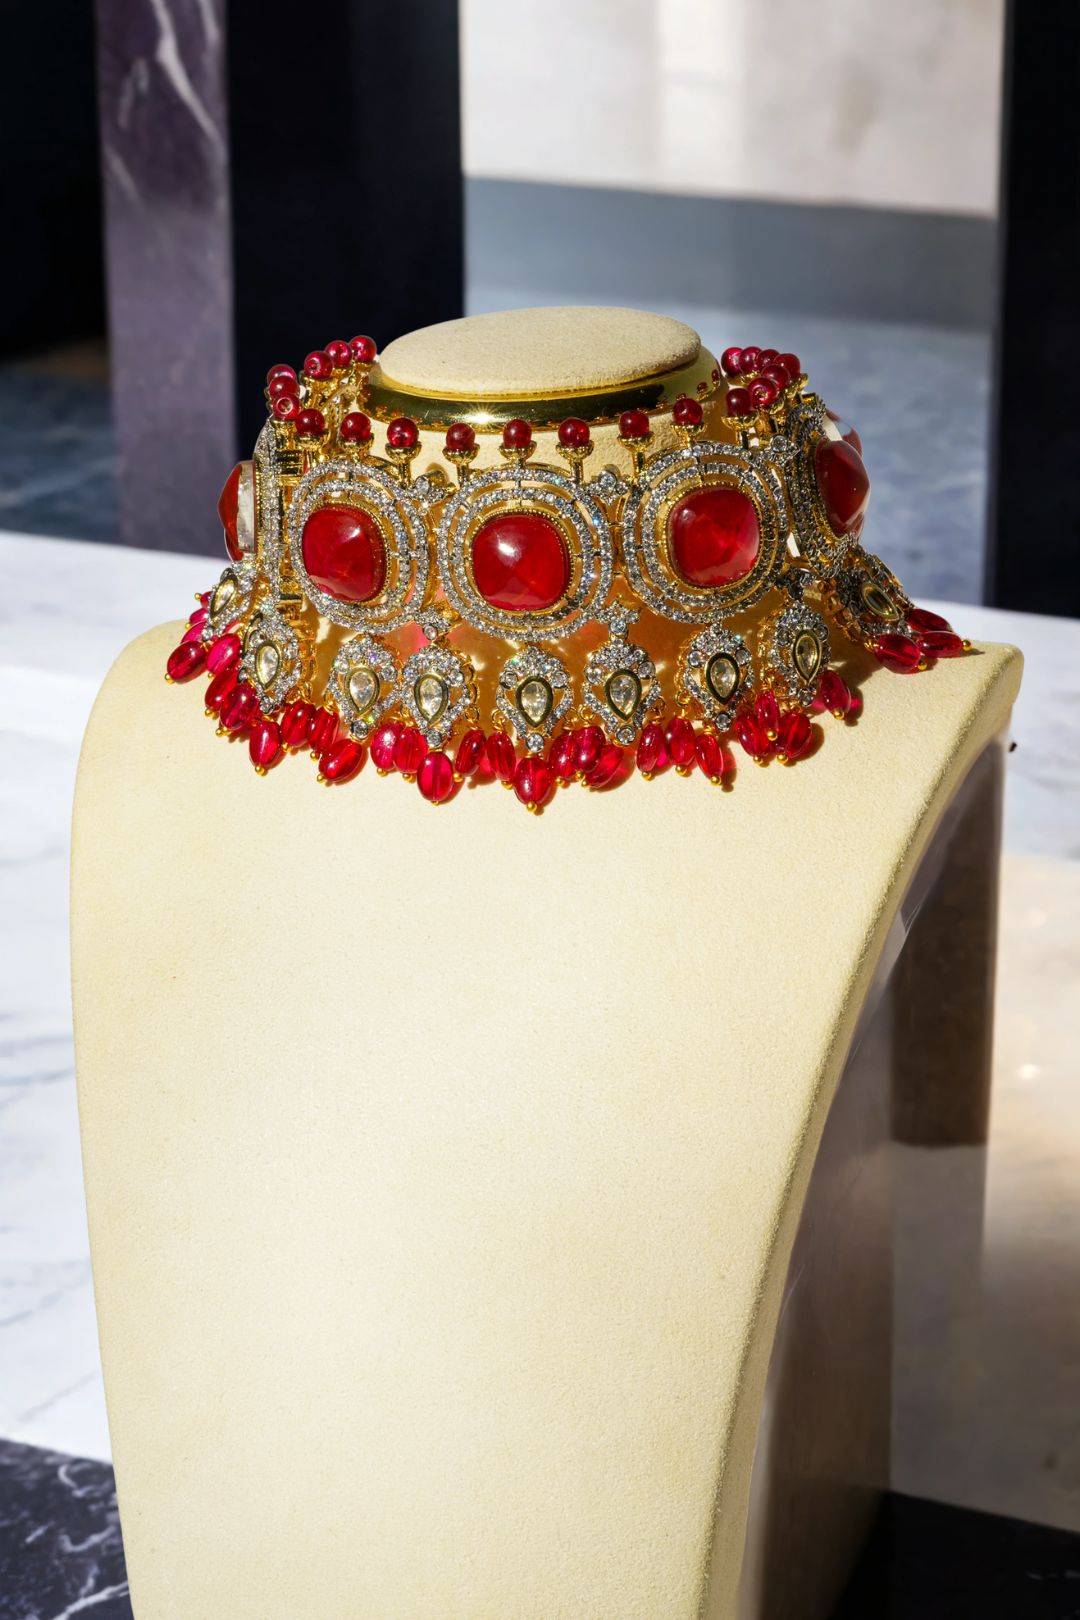 Sweta - Red Choker Necklace with Diamante Accent AD Stones & Kundan Paired with Top Dangler Earrings